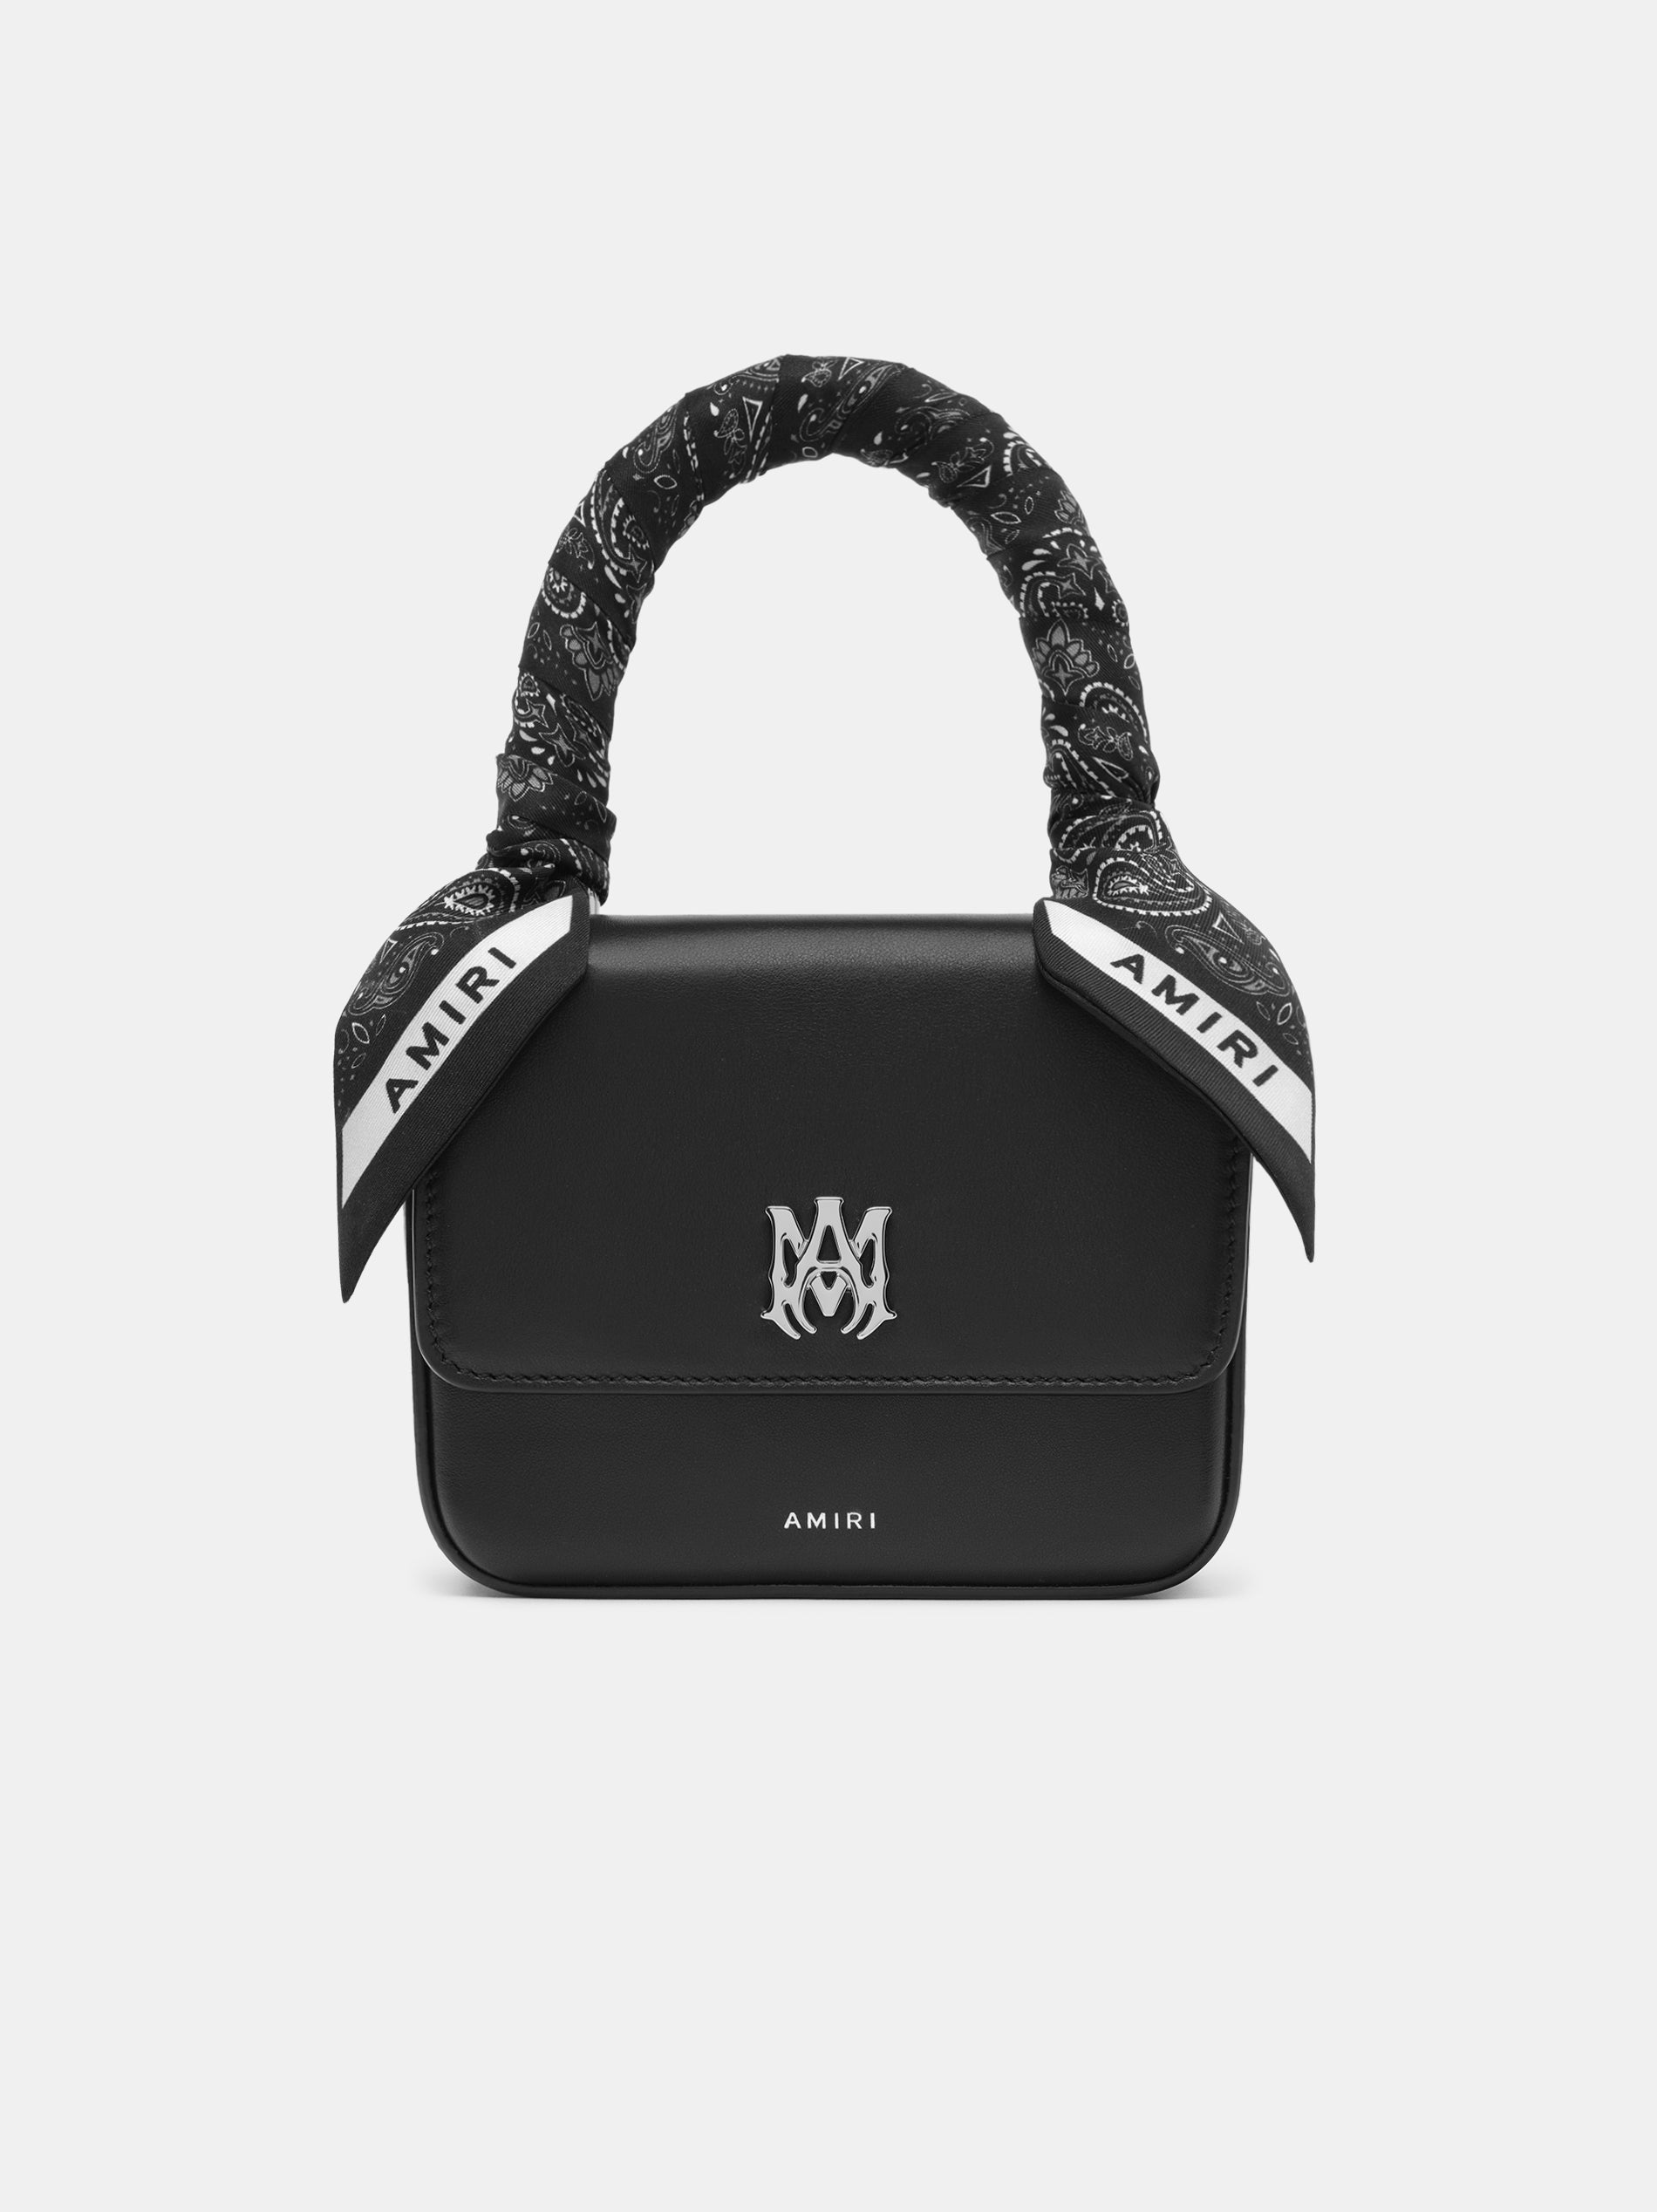 Product WOMEN - MICRO MA BAG - Black featured image